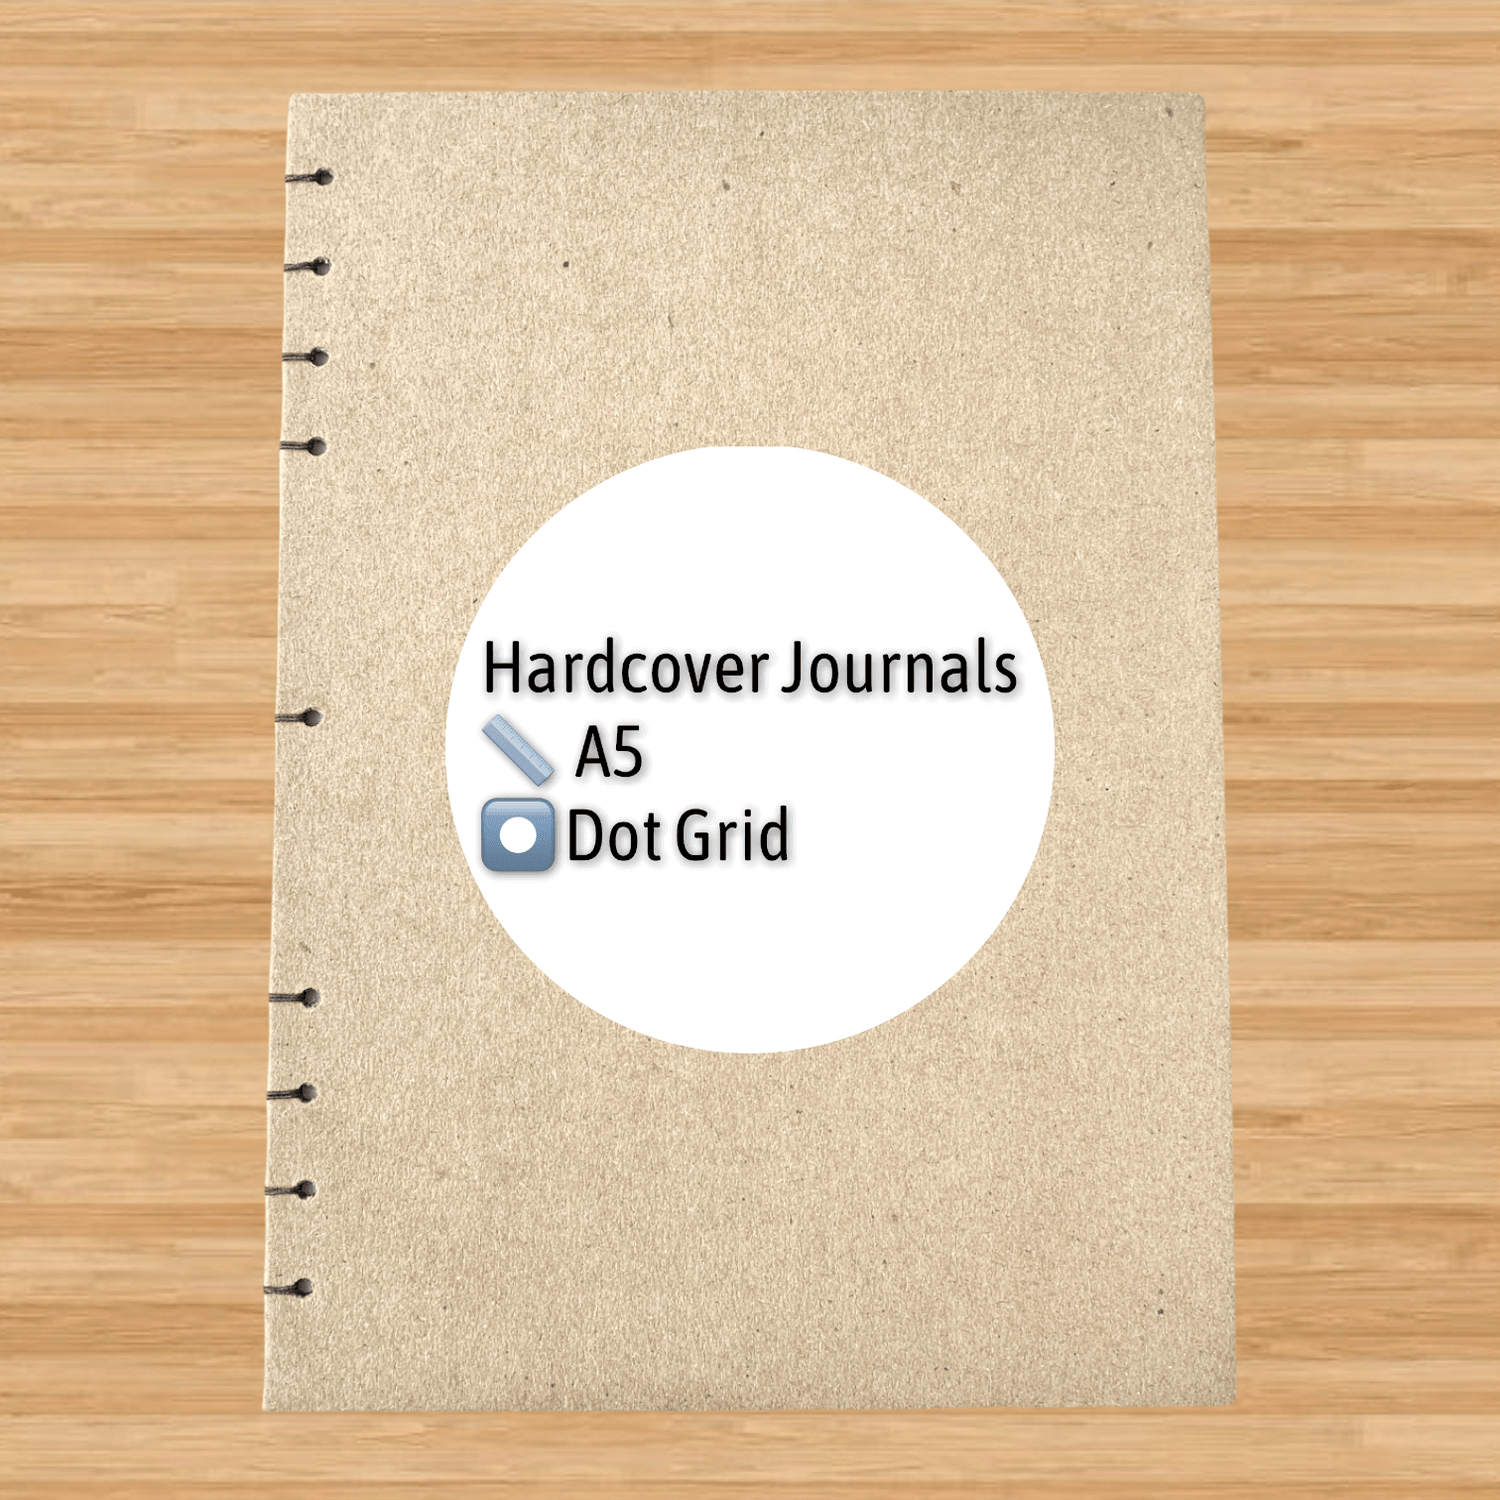 A5 - Hardcover - Hand-Stitched - Dot Grid Journals